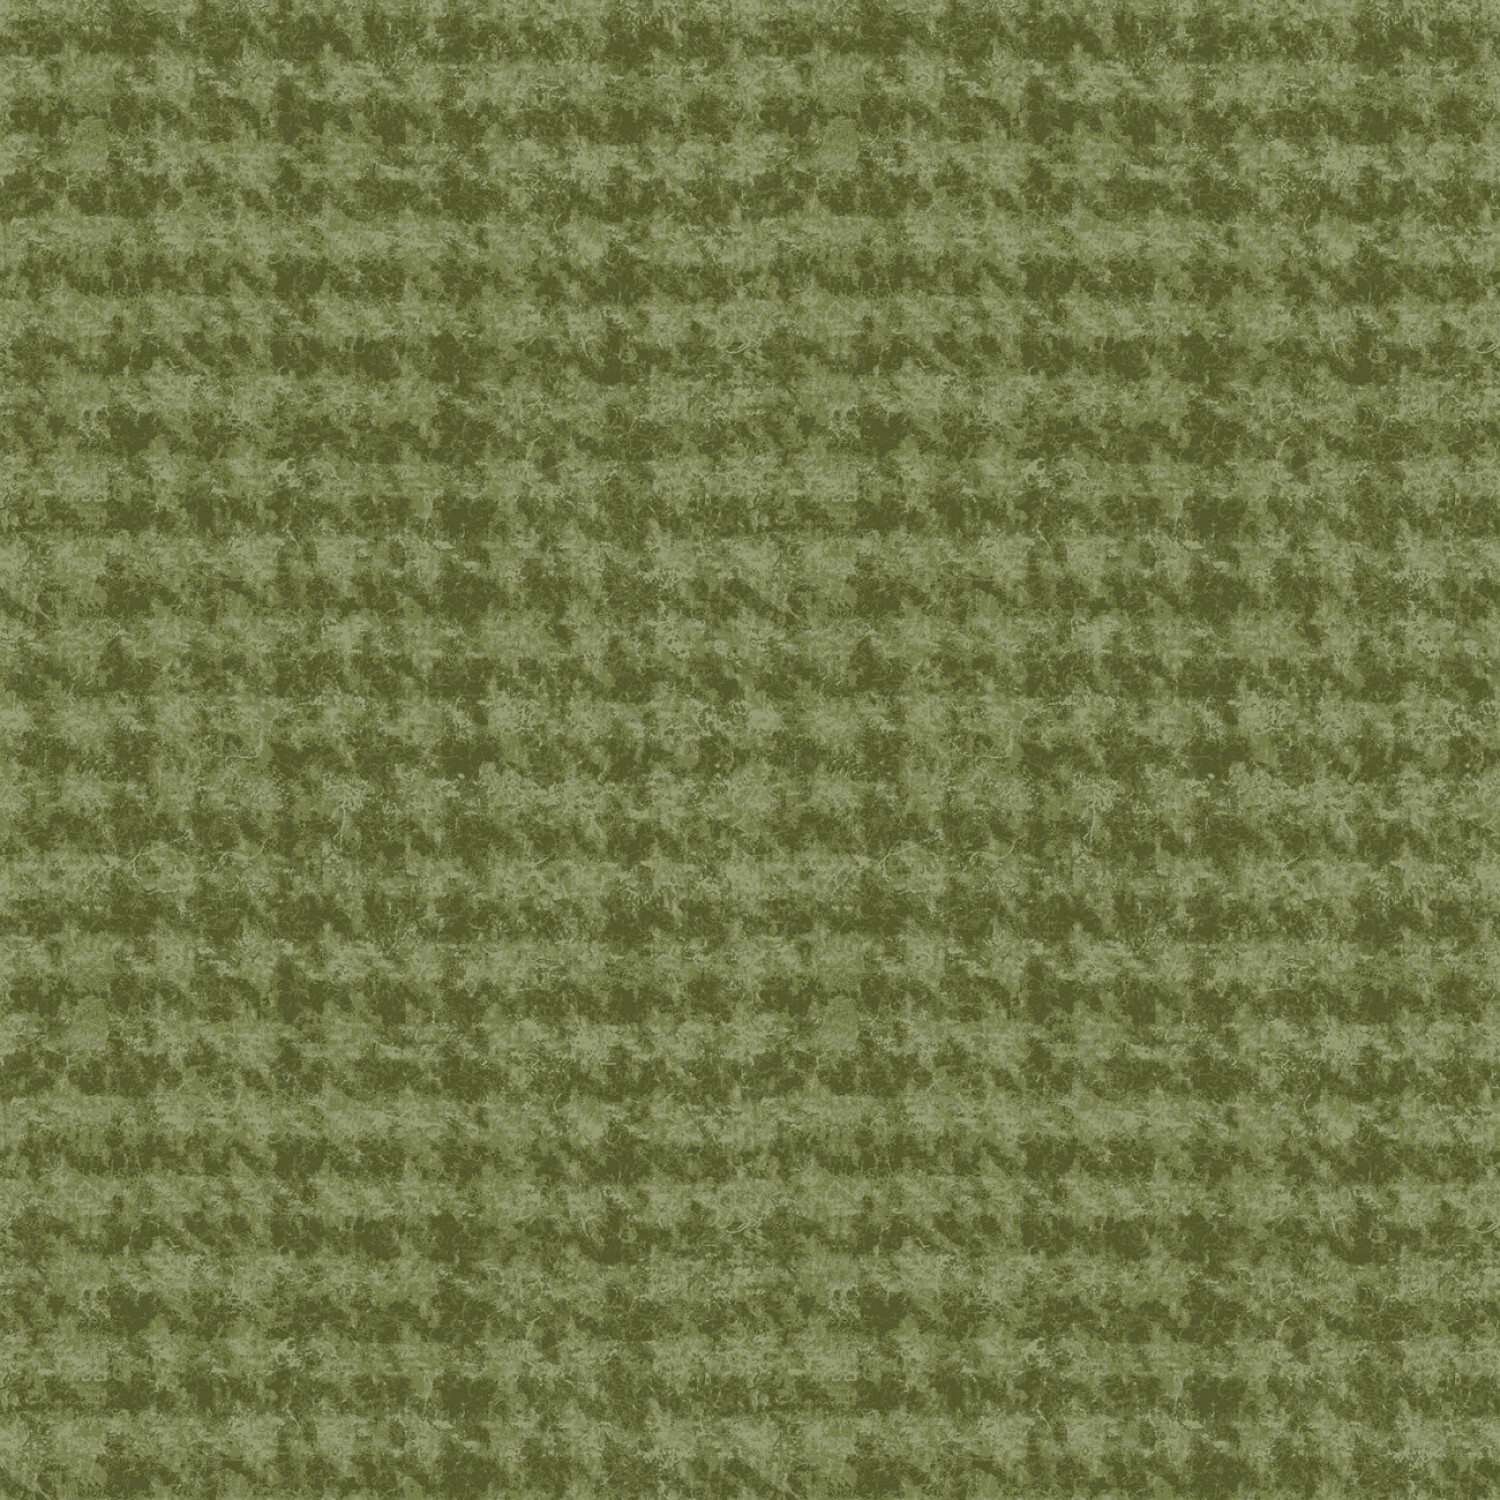 Woolies Flannel - Green Houndstooth - 1/2m cut 58473